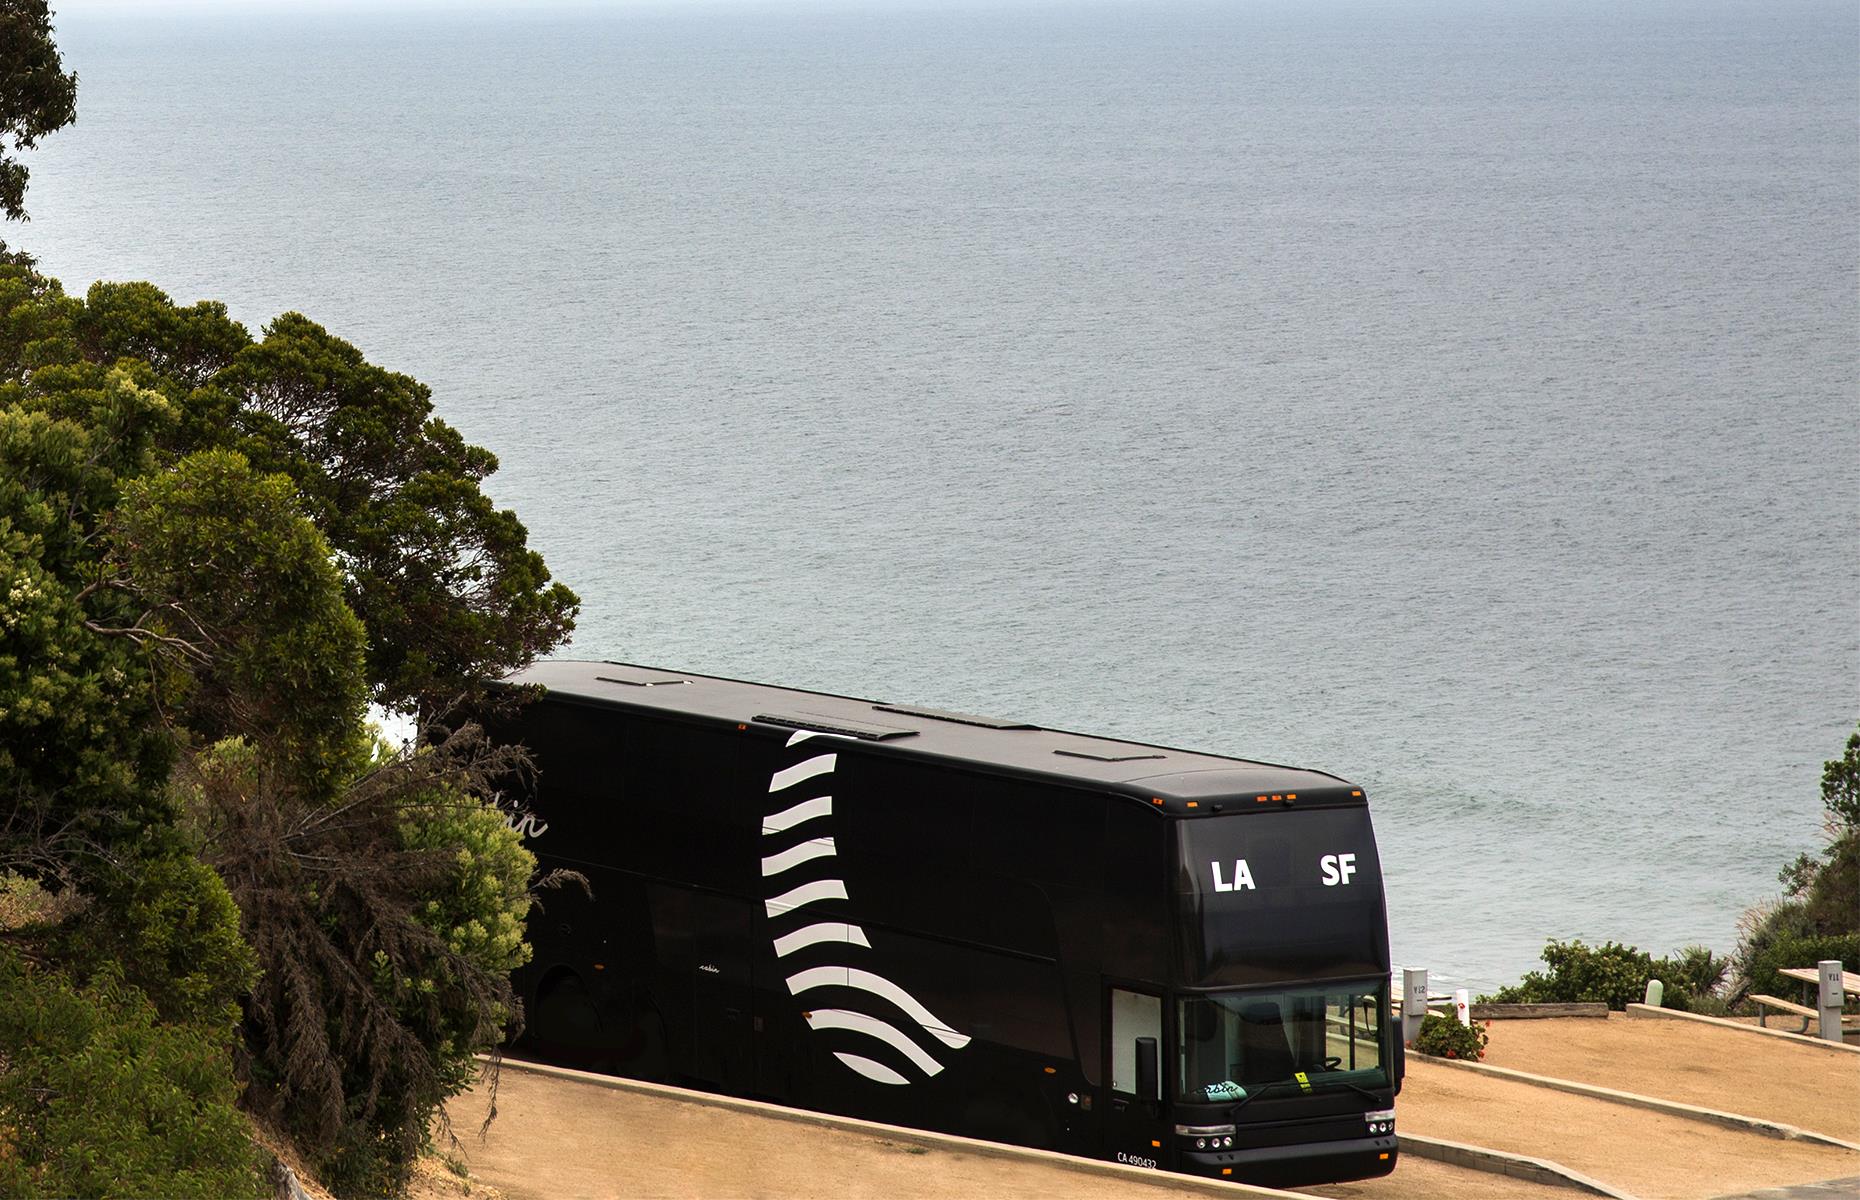 <p>Long-distance bus travel may not sound like a thing of luxury, but California company <a href="https://www.ridecabin.com/">Cabin</a> is aiming to "completely reinvent the bus as we know it". Cabin's vehicle – tipped as the "dream machine" – sits somewhere between a bus and a luxury hotel, with comfy sleeper cabins complete with cozy linens, ambient lighting and little touches like slippers. </p>